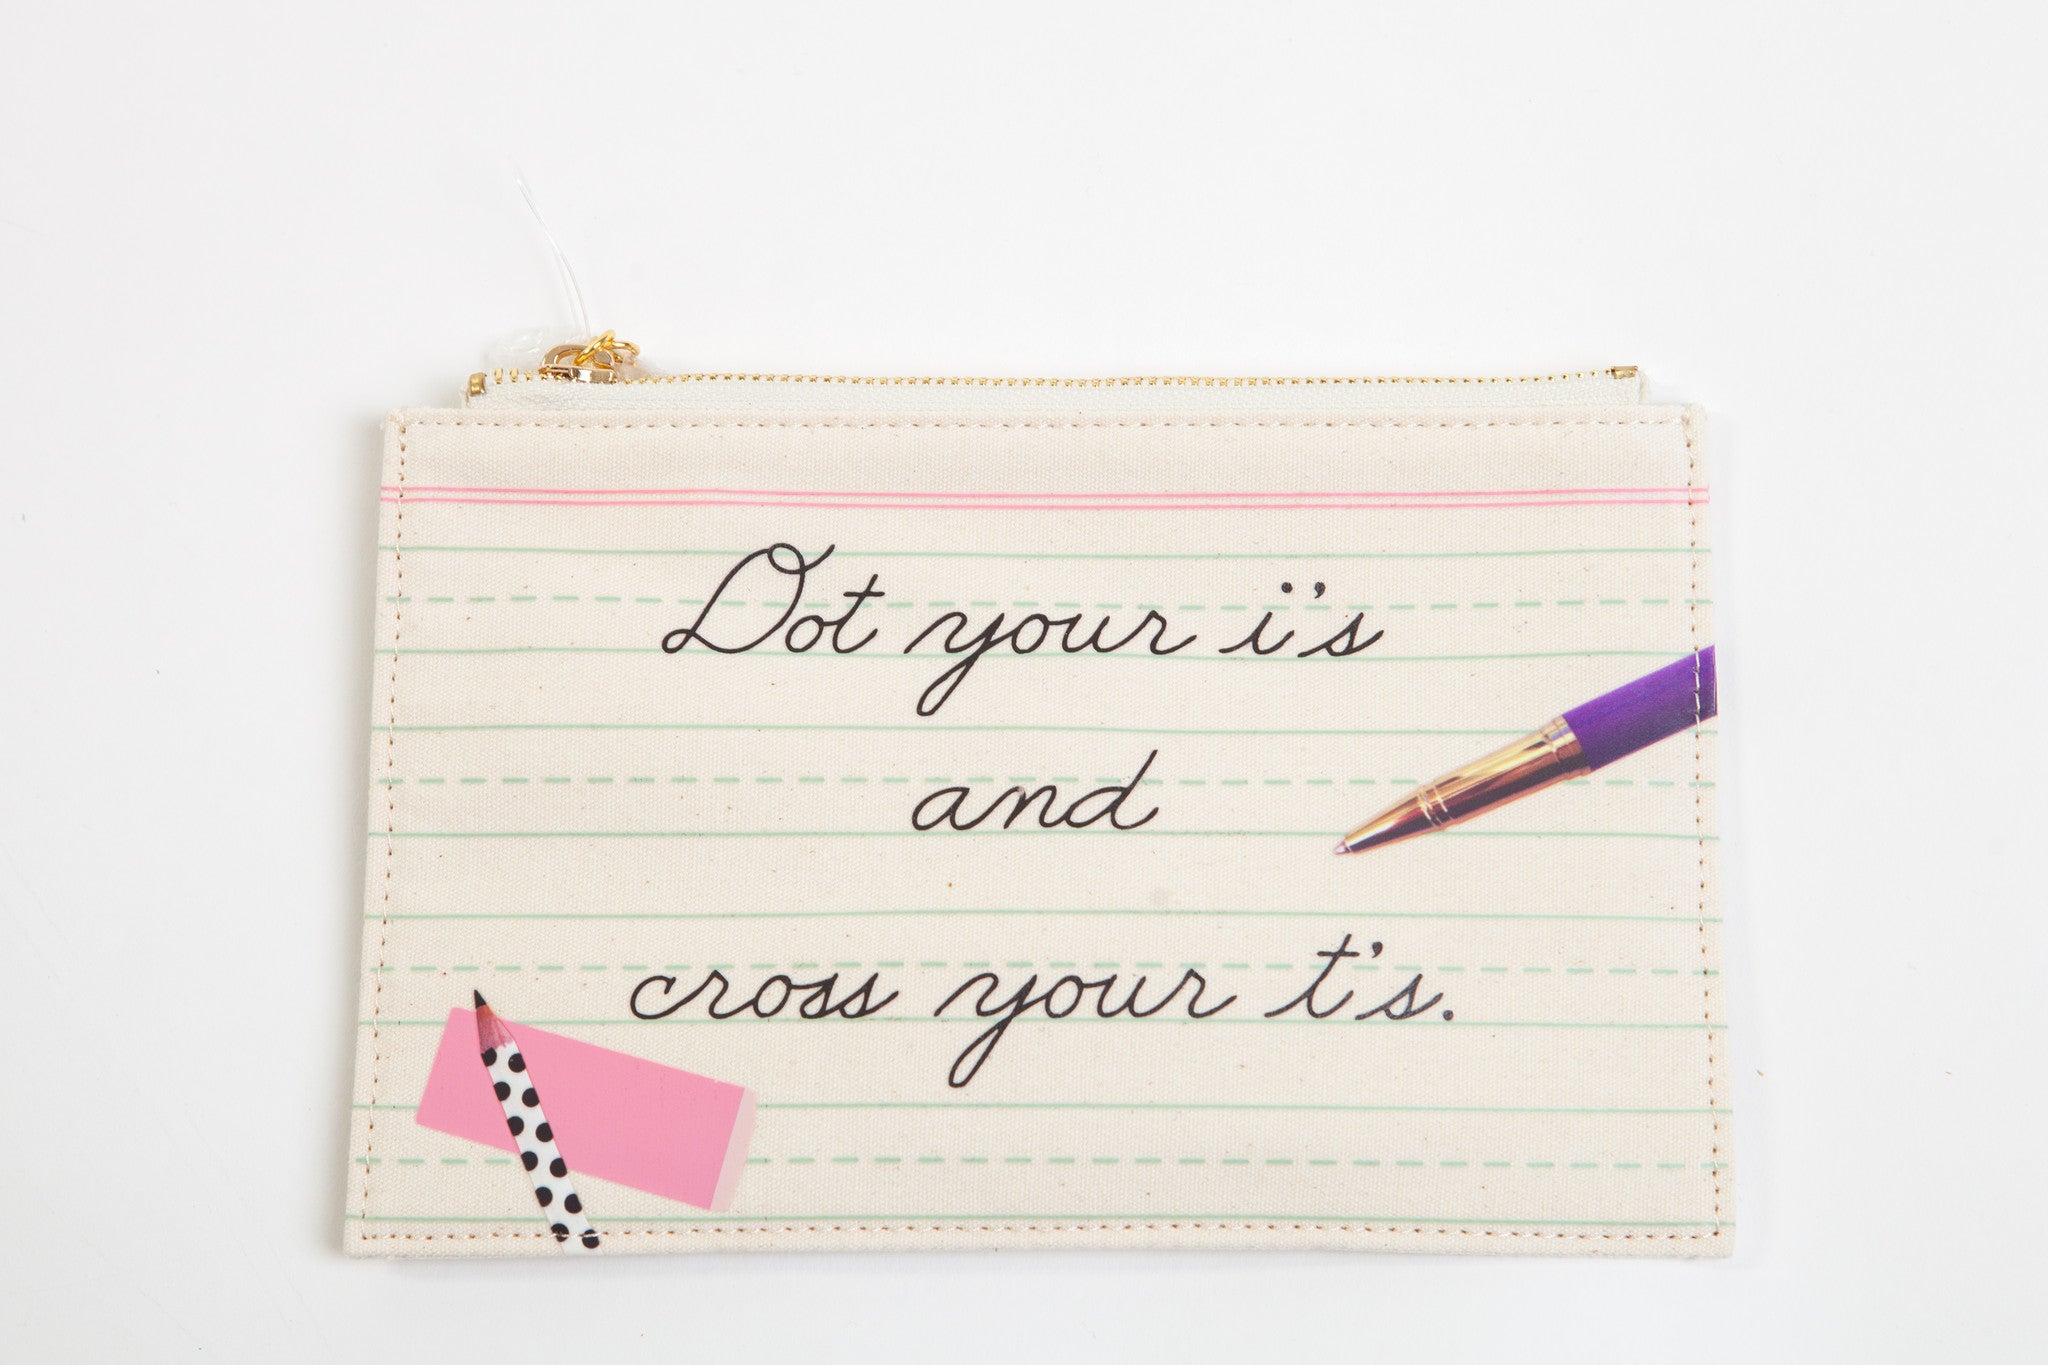 Kate Spade New York Pencil Pouch "Dot your i's"